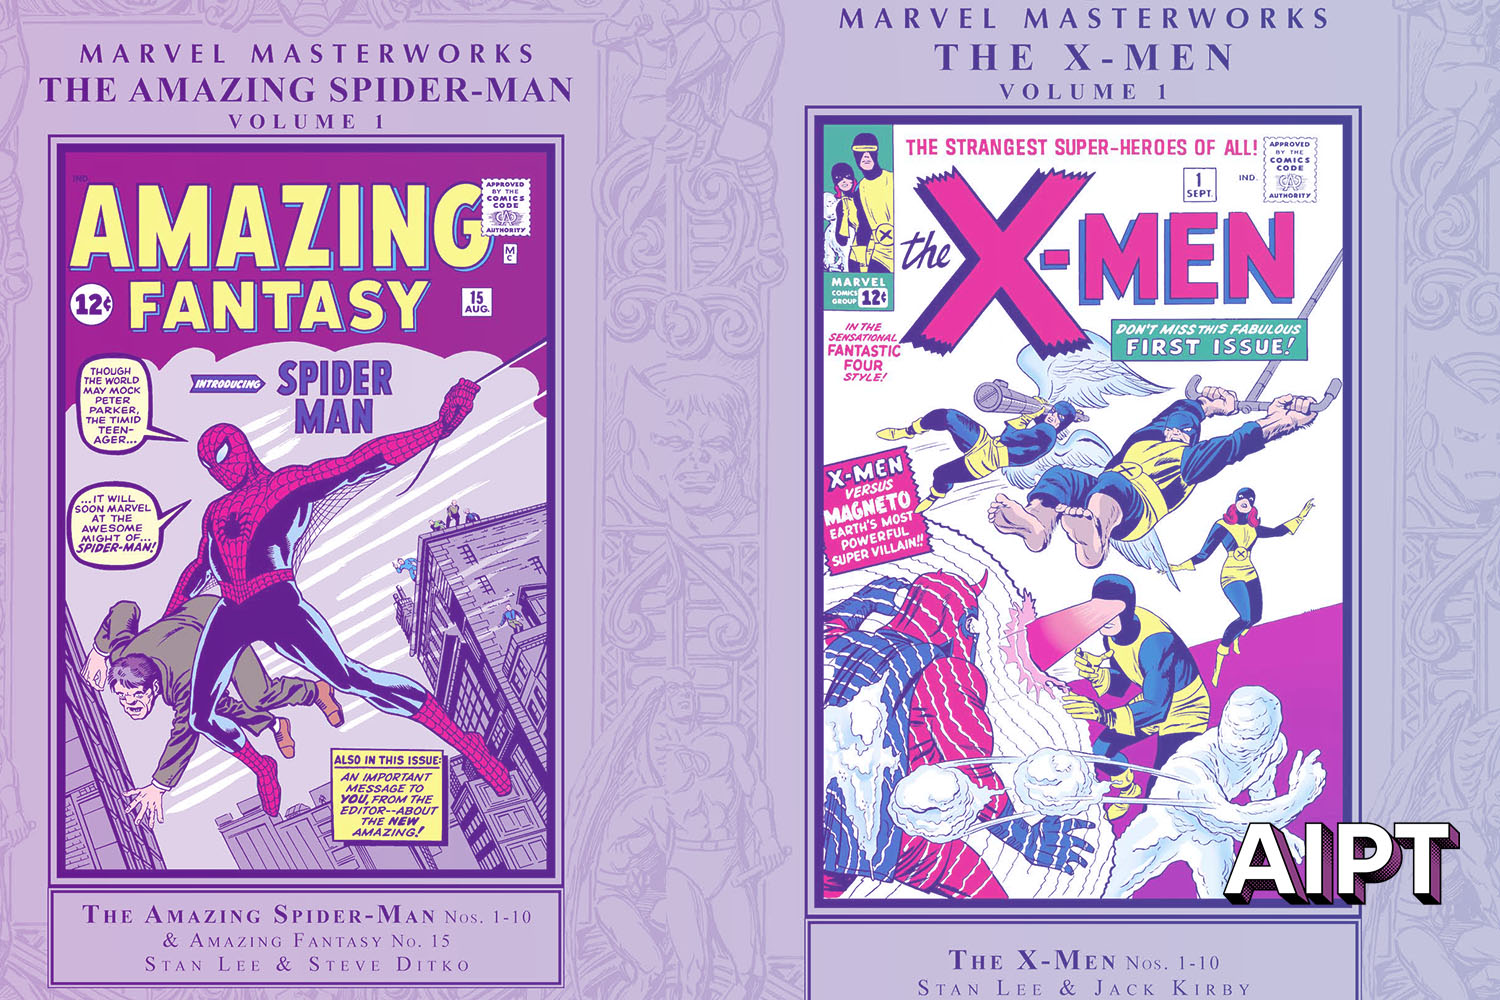 Marvel to upgrade 'Marvel Masterworks' in 2023 with Spider-Man, X-Men, and more